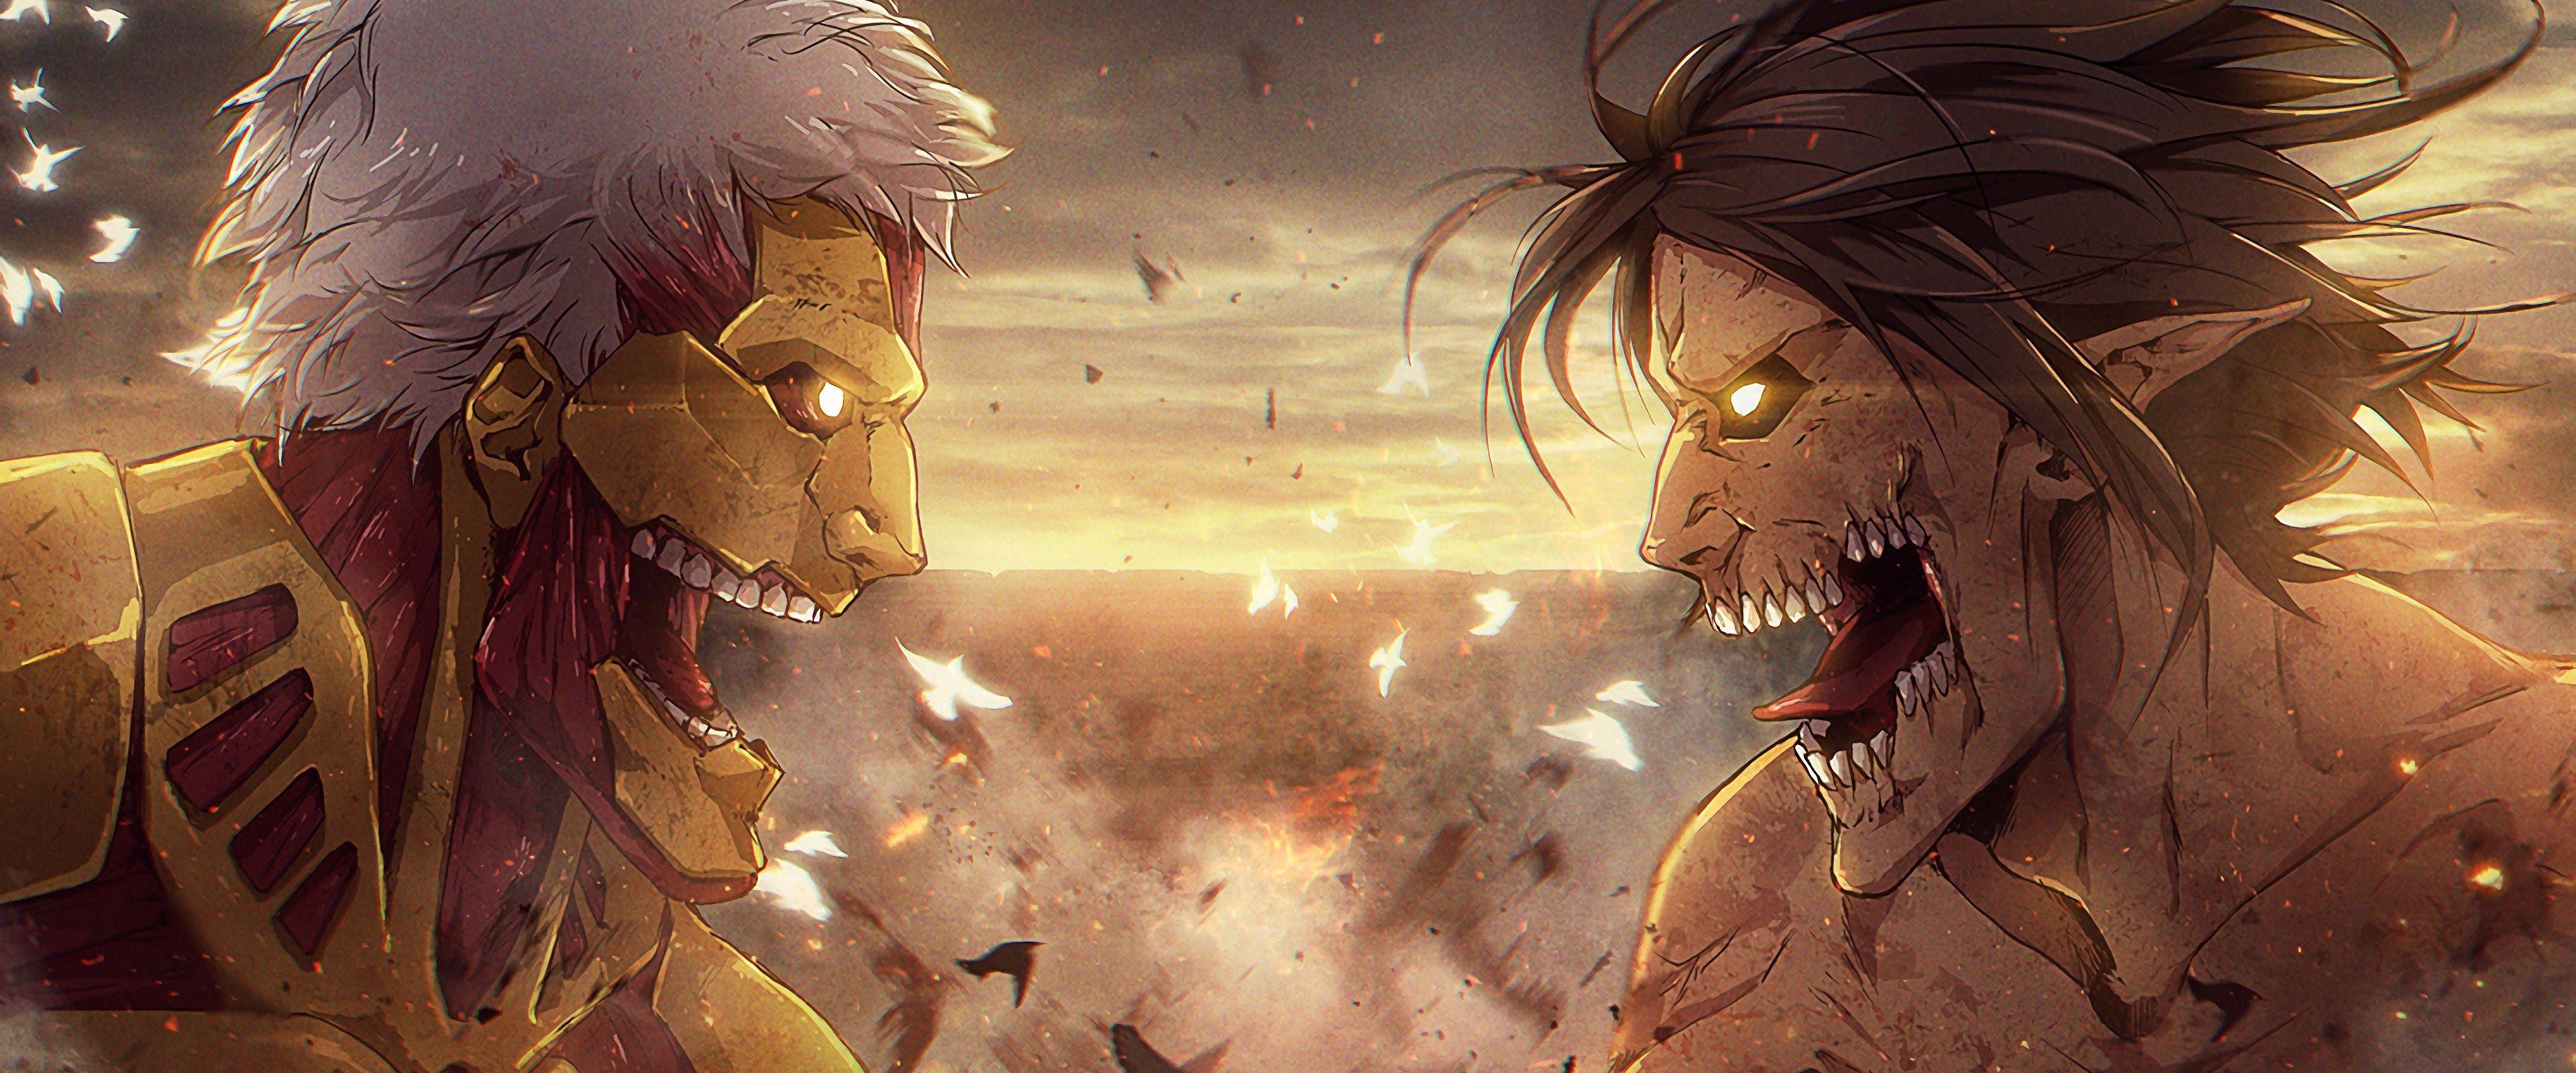 3840 x 1600 · jpeg - Attack On Titan Computer Wallpapers - Top Free Attack On Titan Computer ...